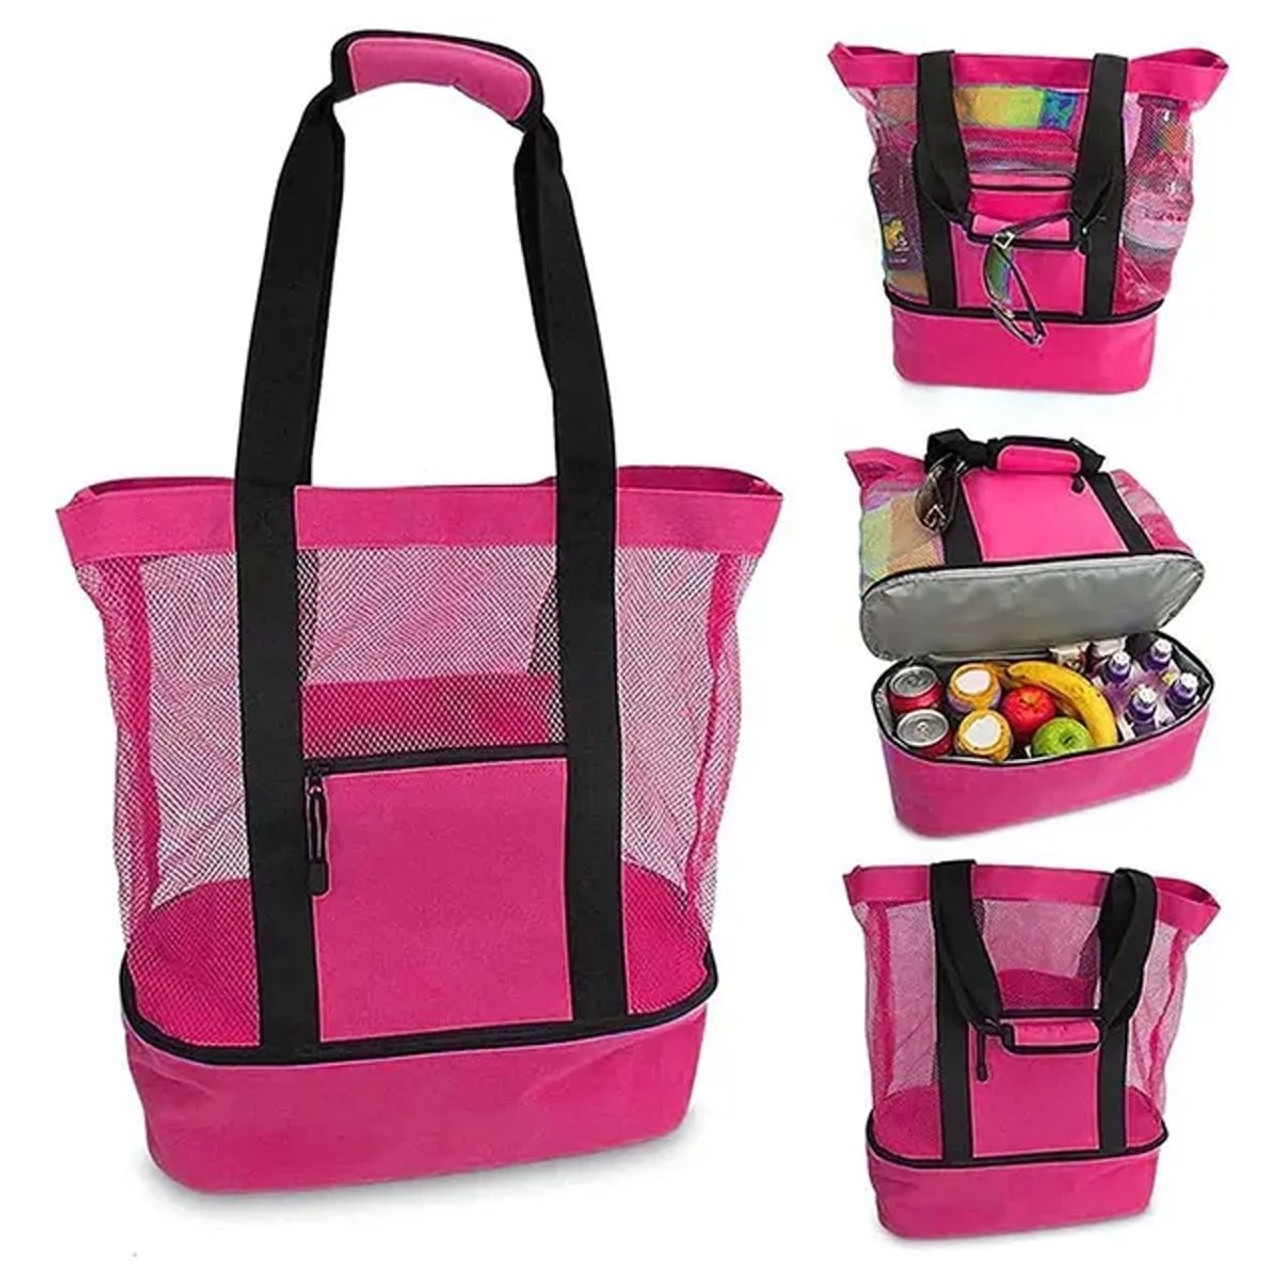 2-in-1 Beach Tote Insulated Cooler Bag product image